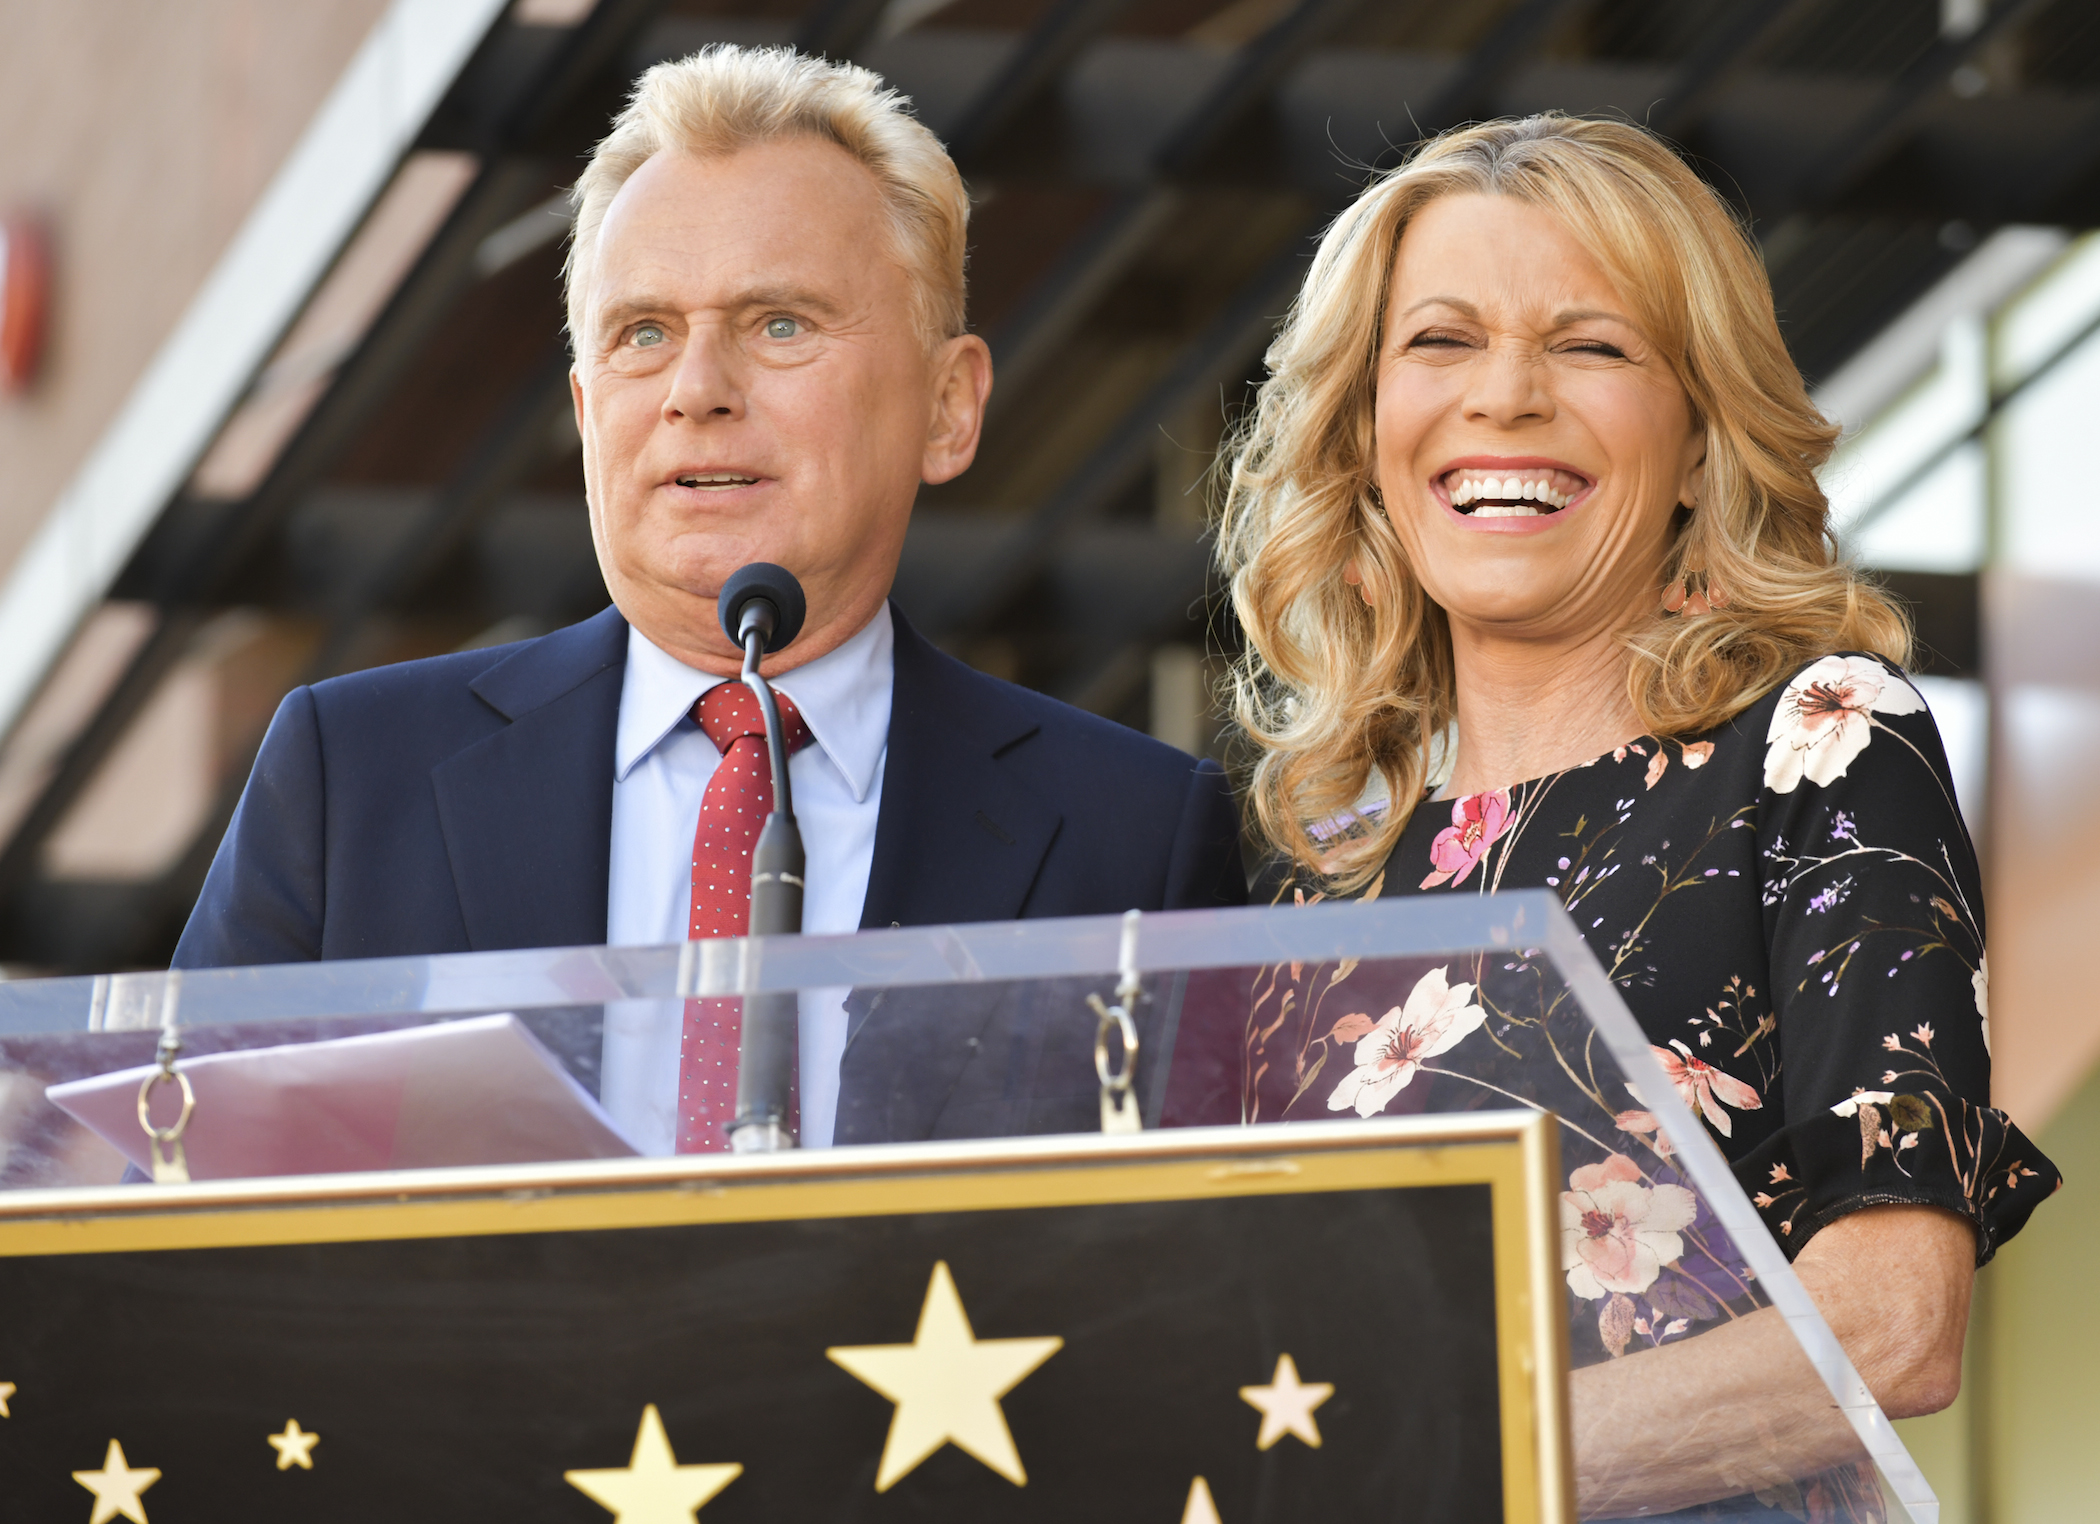 Pat Sajak and Vanna White from ‘Wheel of Fortune’ honored at the Hollywood Walk of Fame